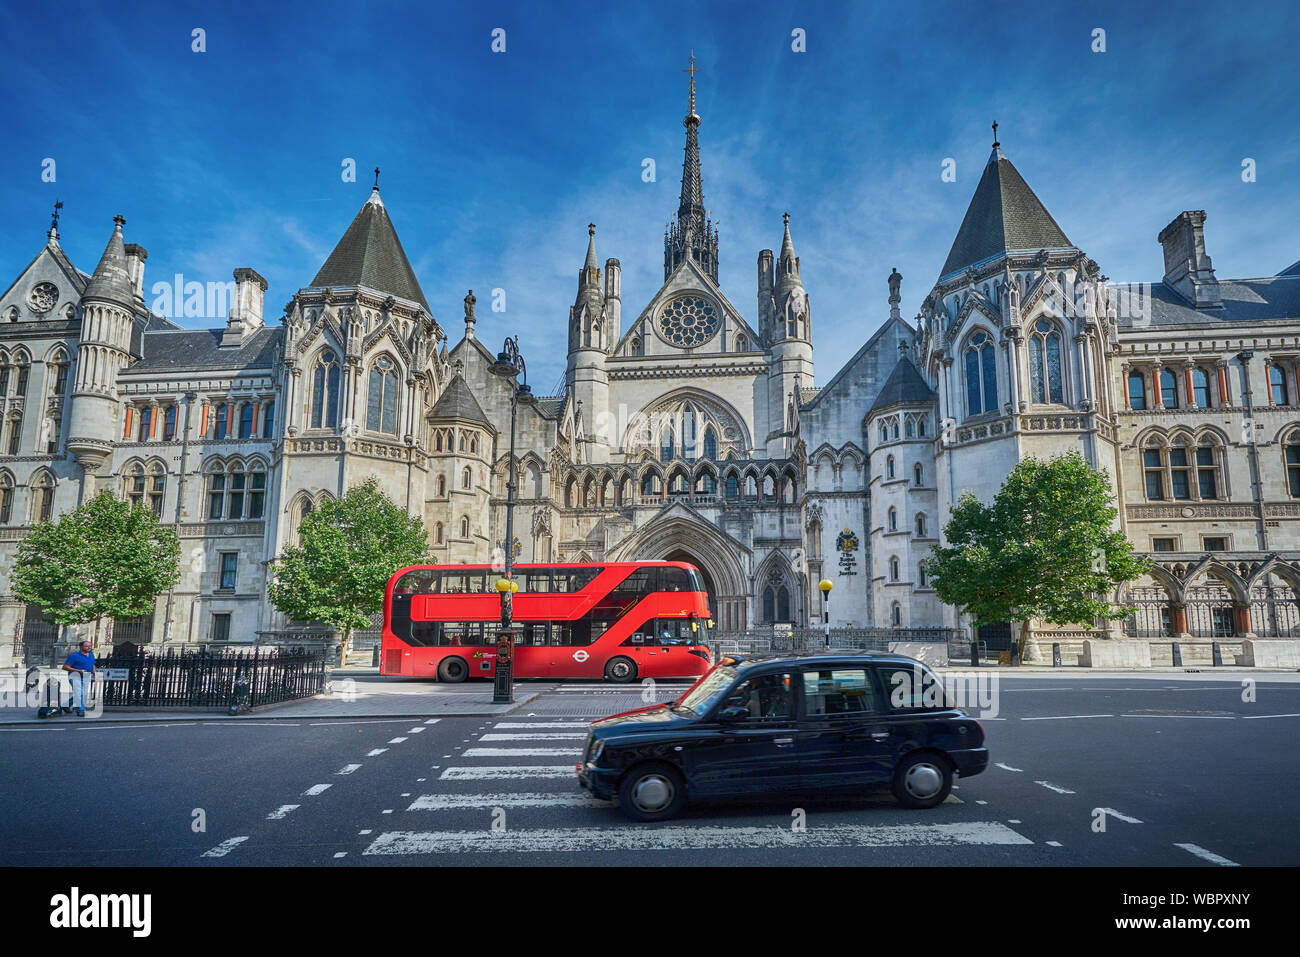 Die Royal Courts of Justice in London. Das hohe Gericht. Stockfoto